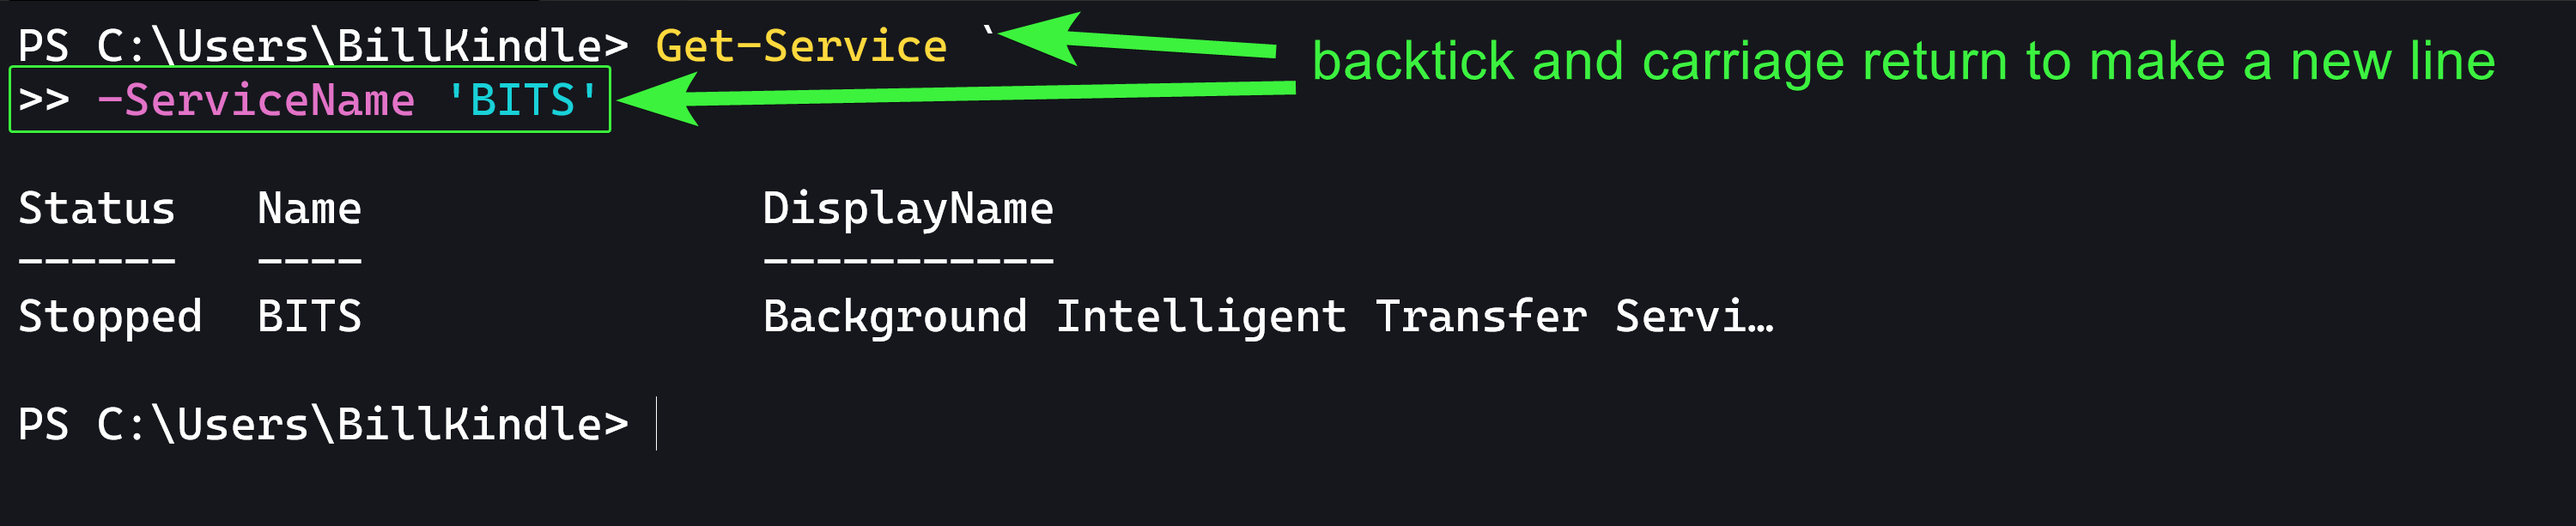 With the backtick, a new line is formed, and the parameters show up on a new line 